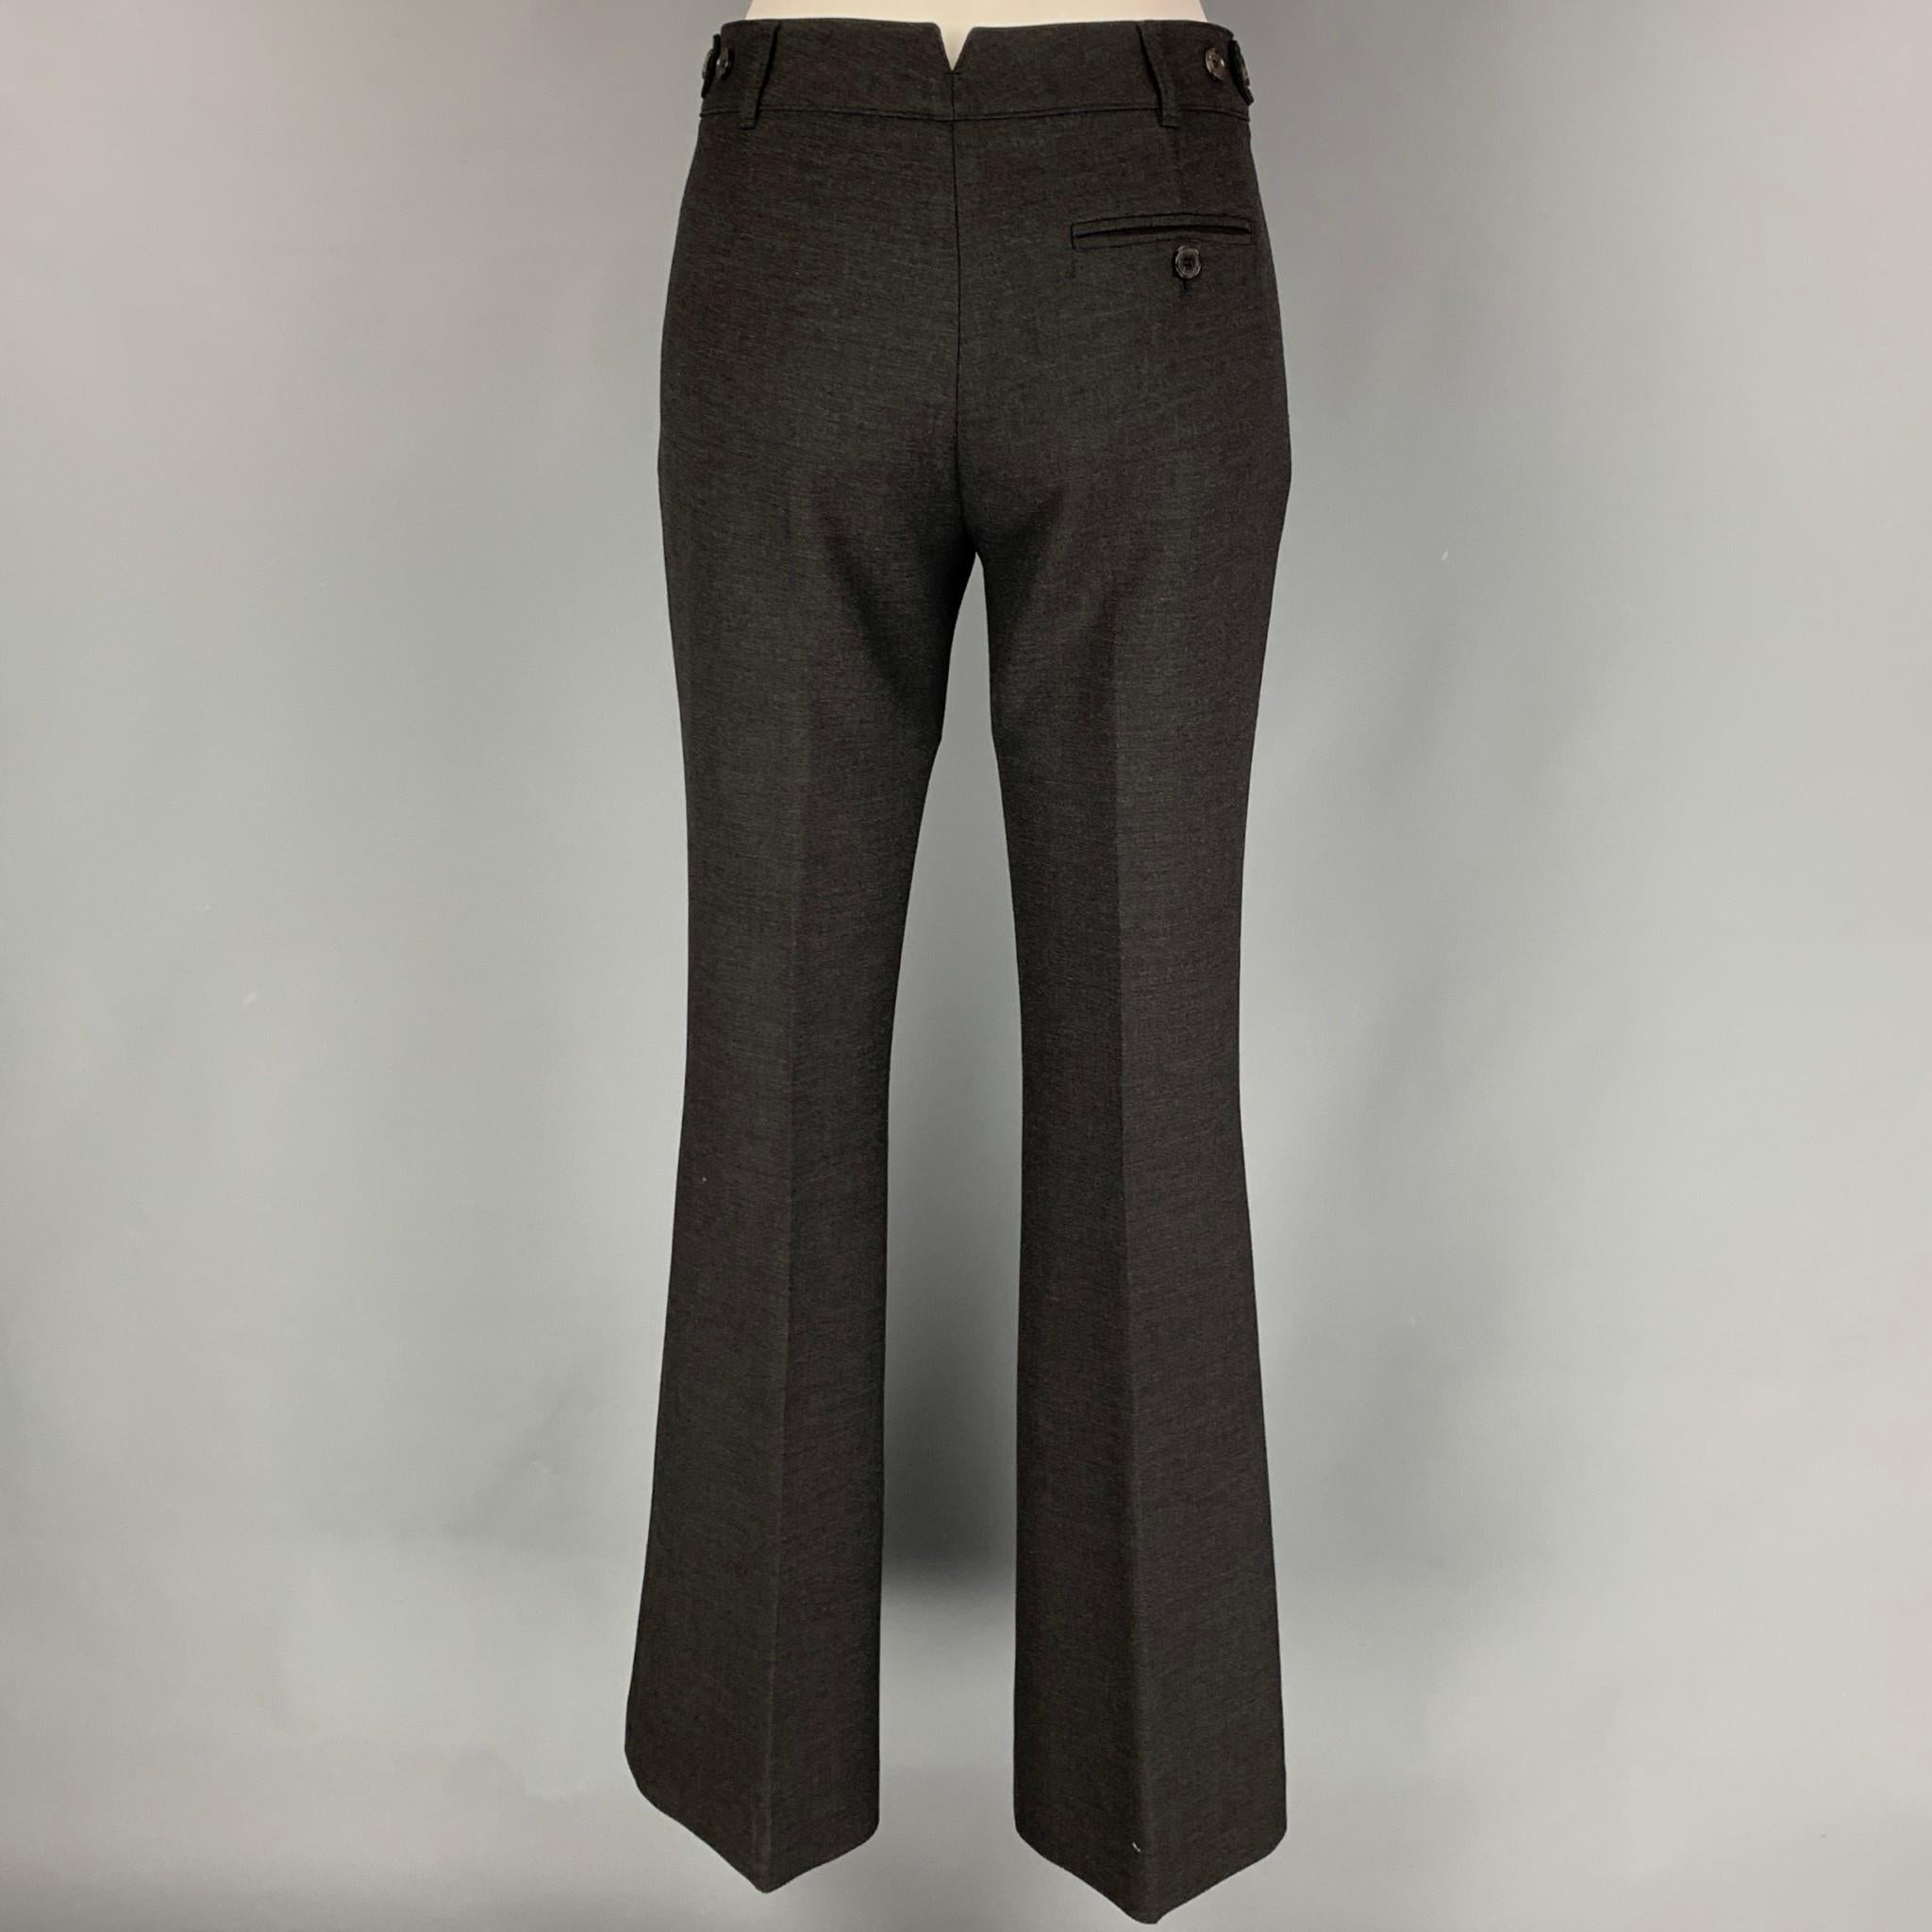 BURBERRY LONDON dress pants comes in a charcoal polyester blend featuring a wide leg style, side tabs, and a zip fly closure. Made in Portugal.

Very Good Pre-Owned Condition.
Marked: UK 6 / USA 4 / ITA 38 / GER 34

Measurements:

Waist: 30